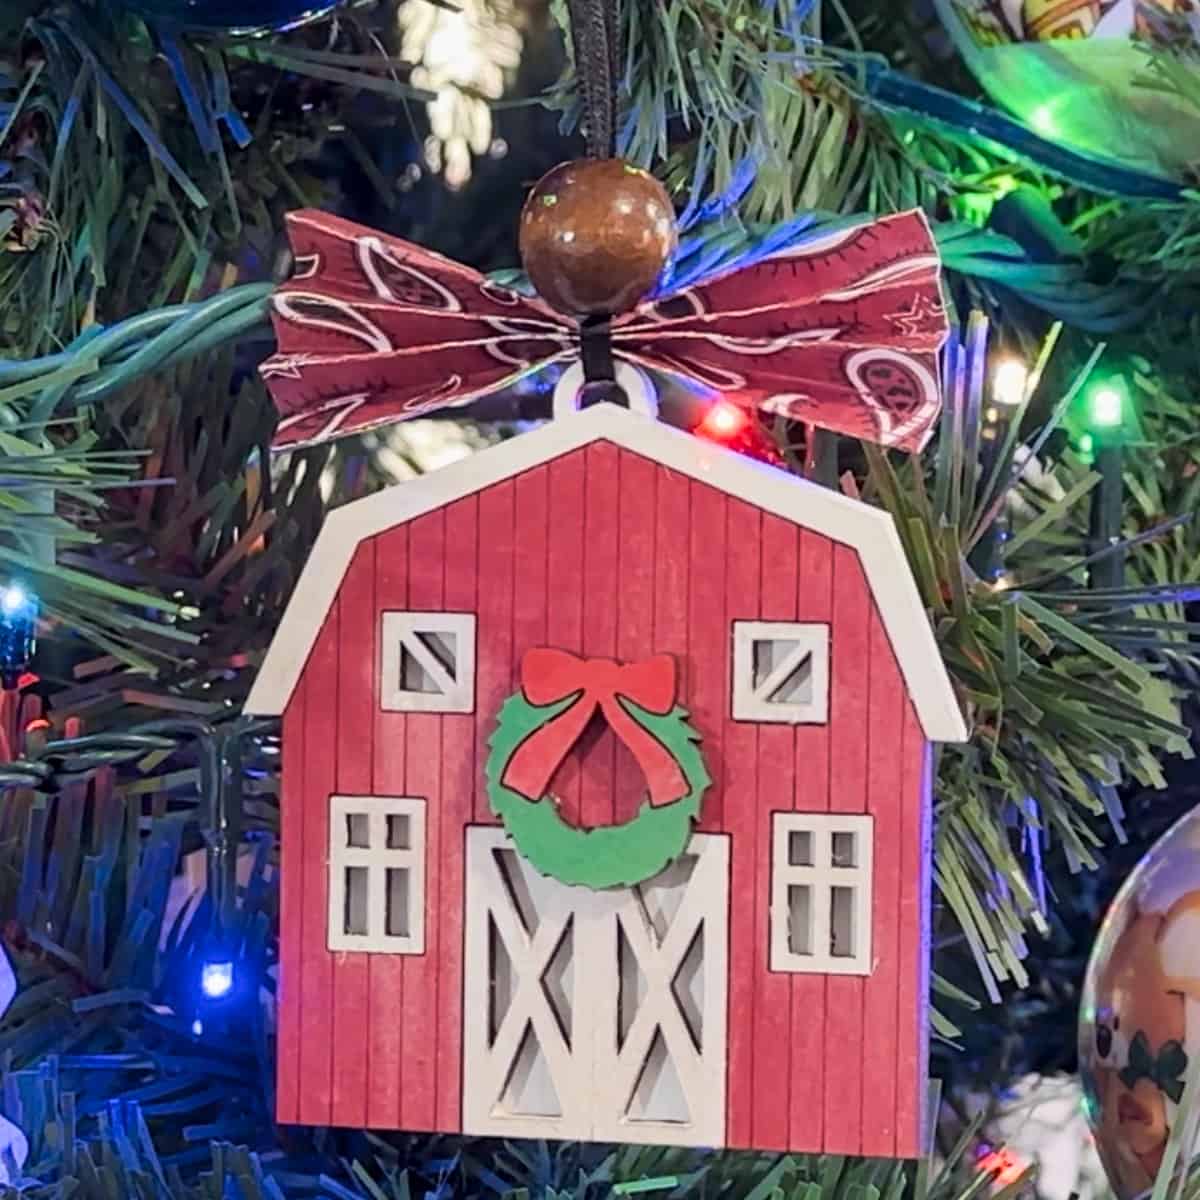 Old Barn Christmas Ornament hanging on a tree.